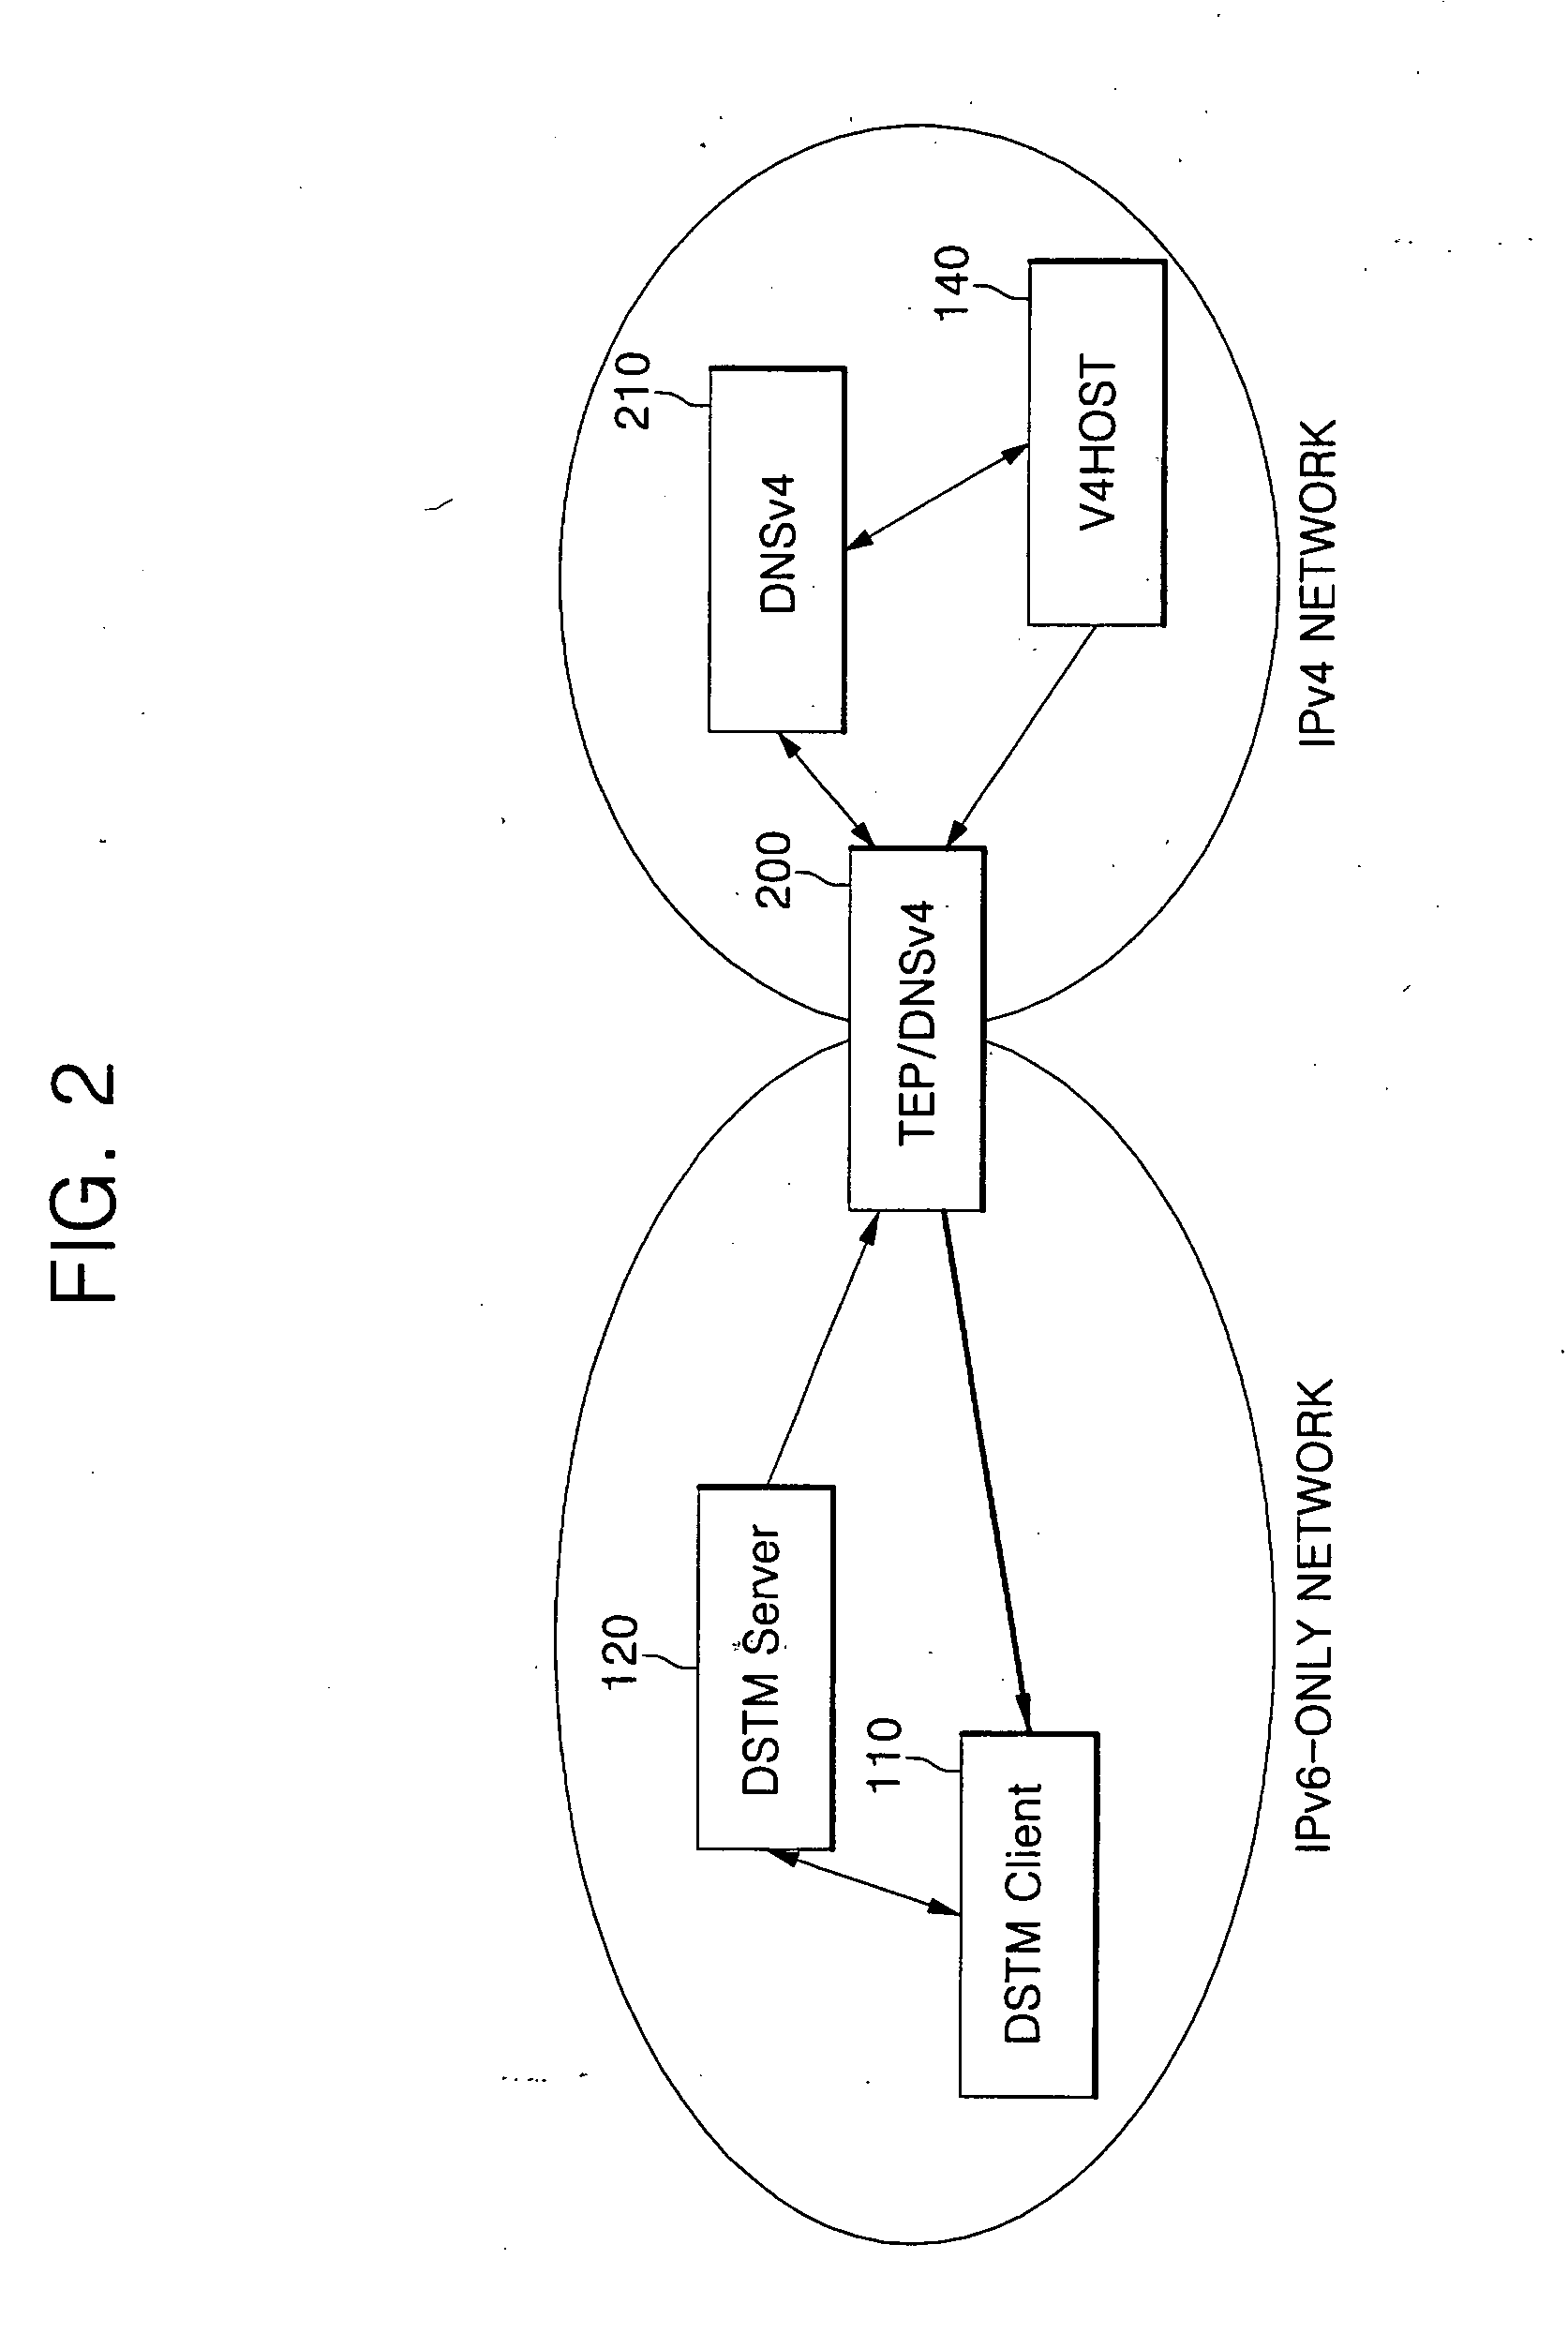 IPv4-IPv6 transition system and method using dual stack transition mechanism(DTSM)